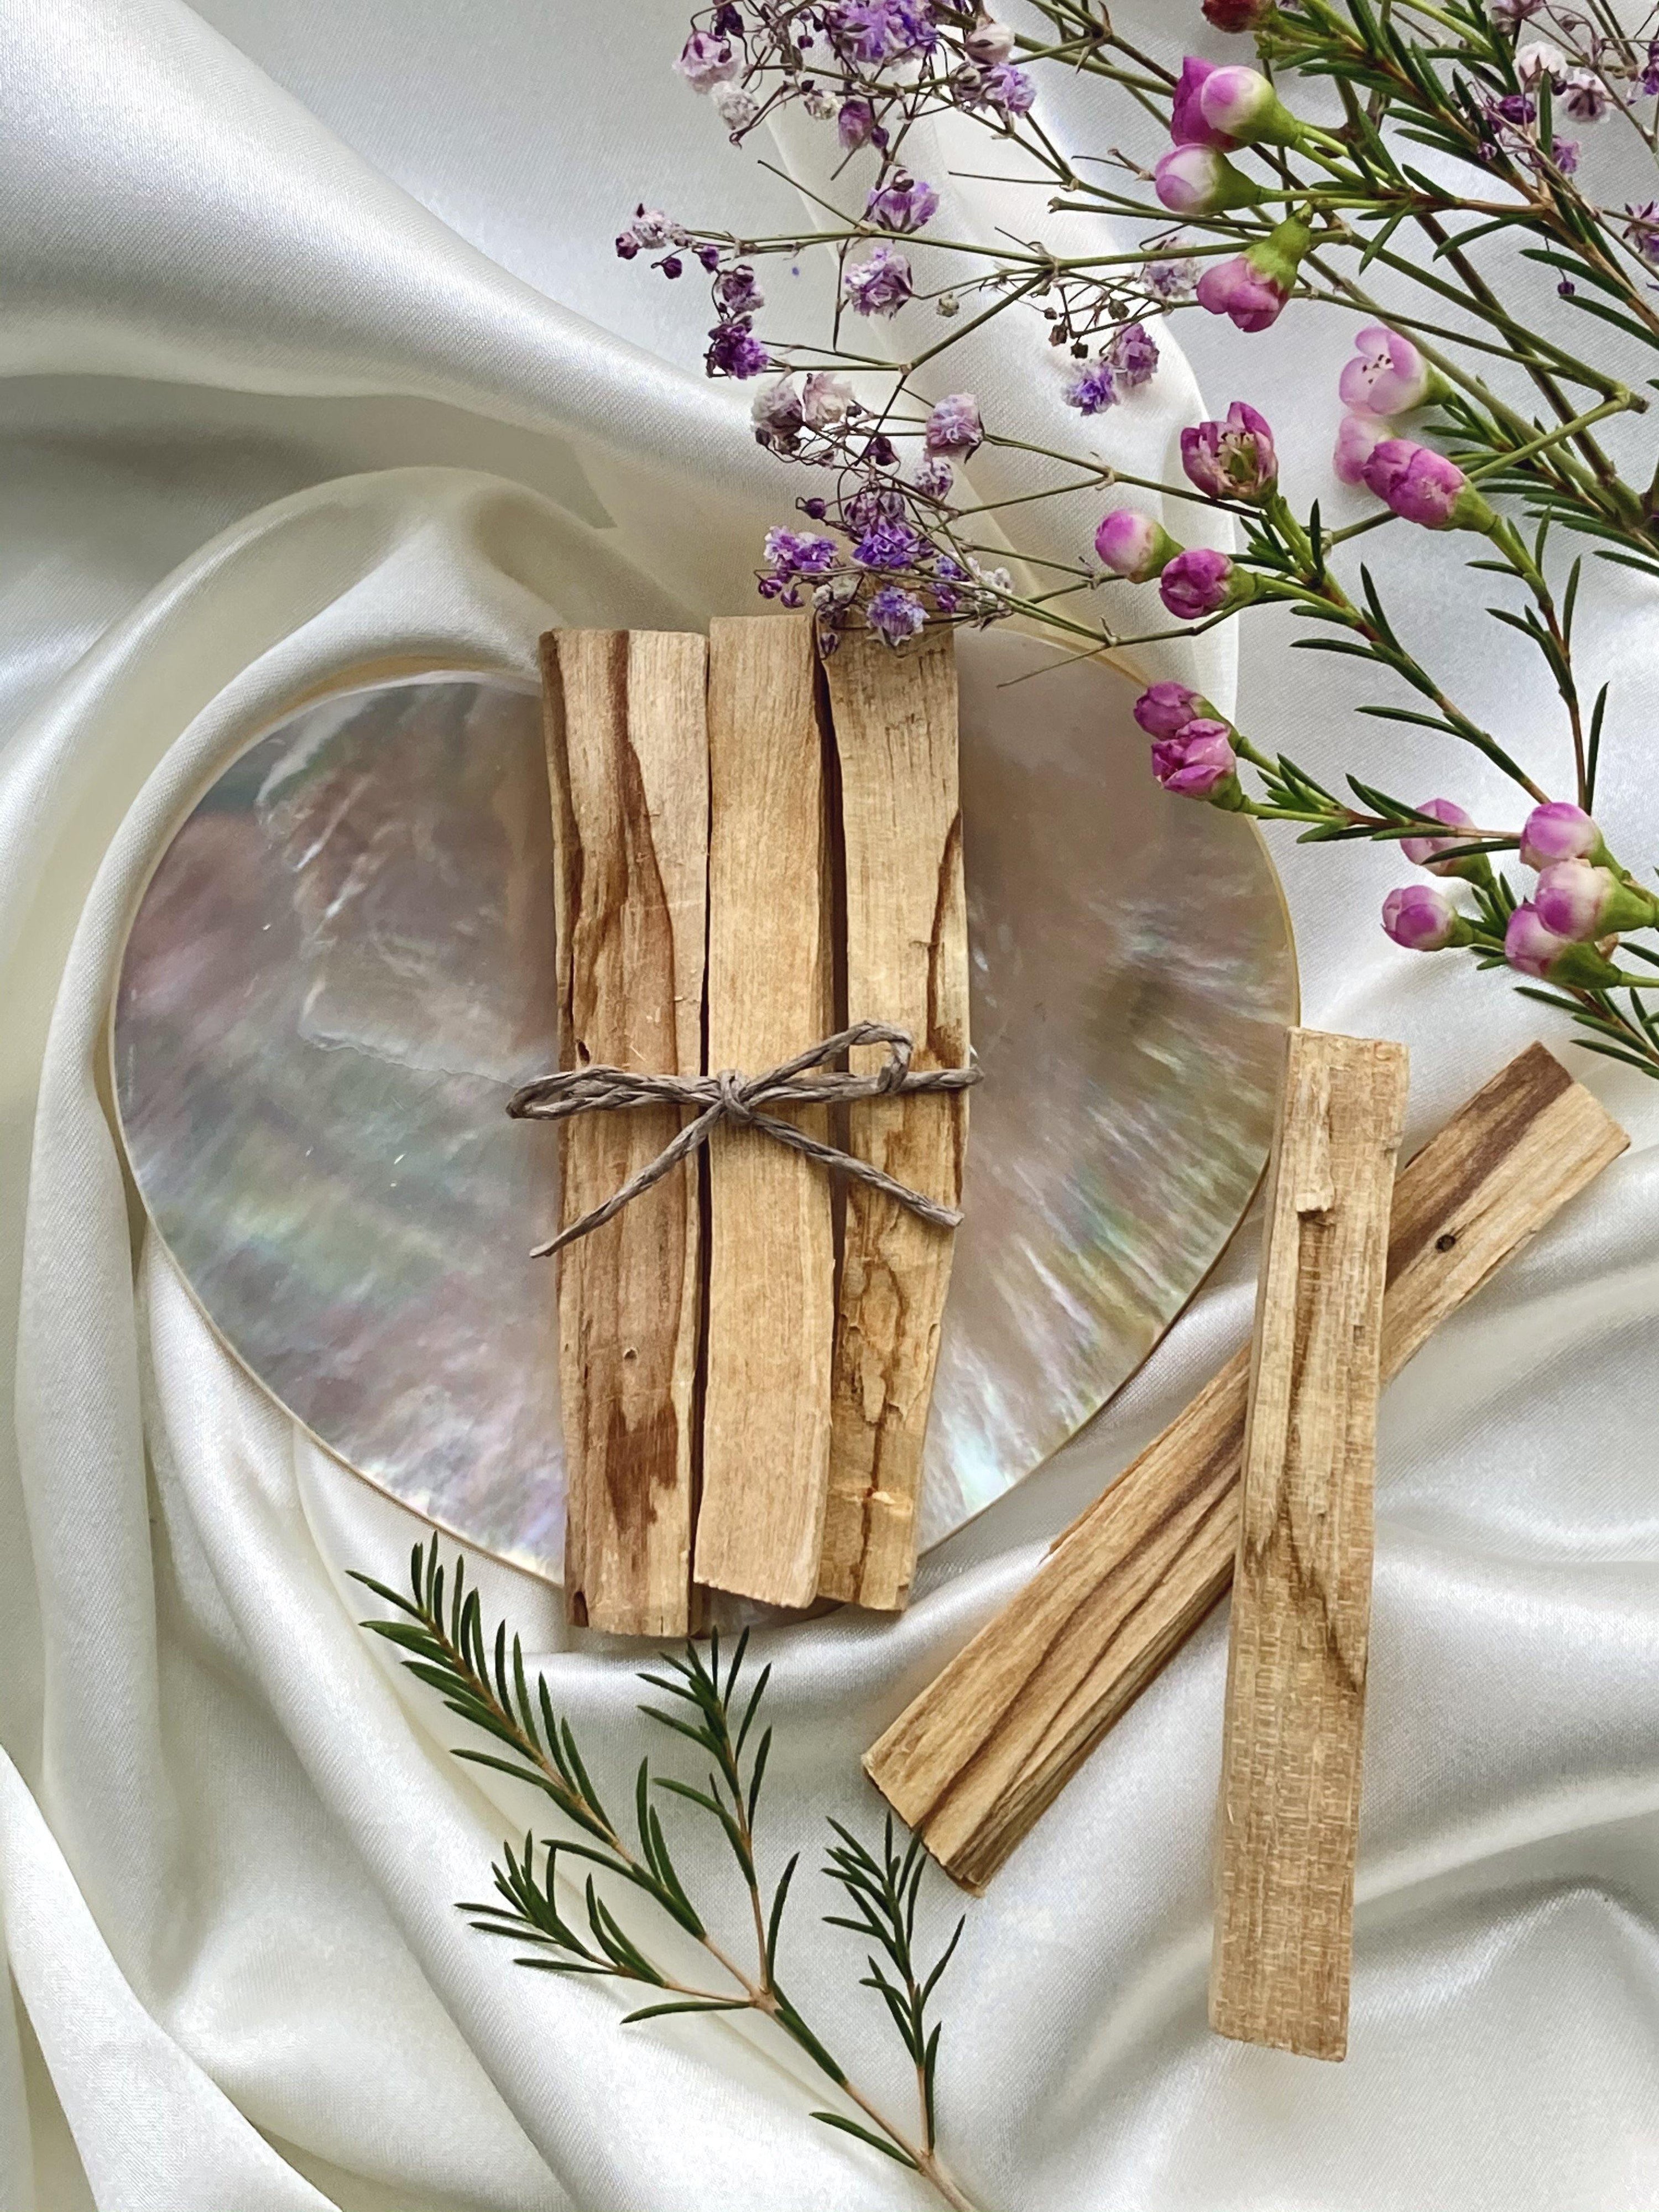 Palo Santo Sticks- Holy Wood Sticks-for Clearing, Peaceful